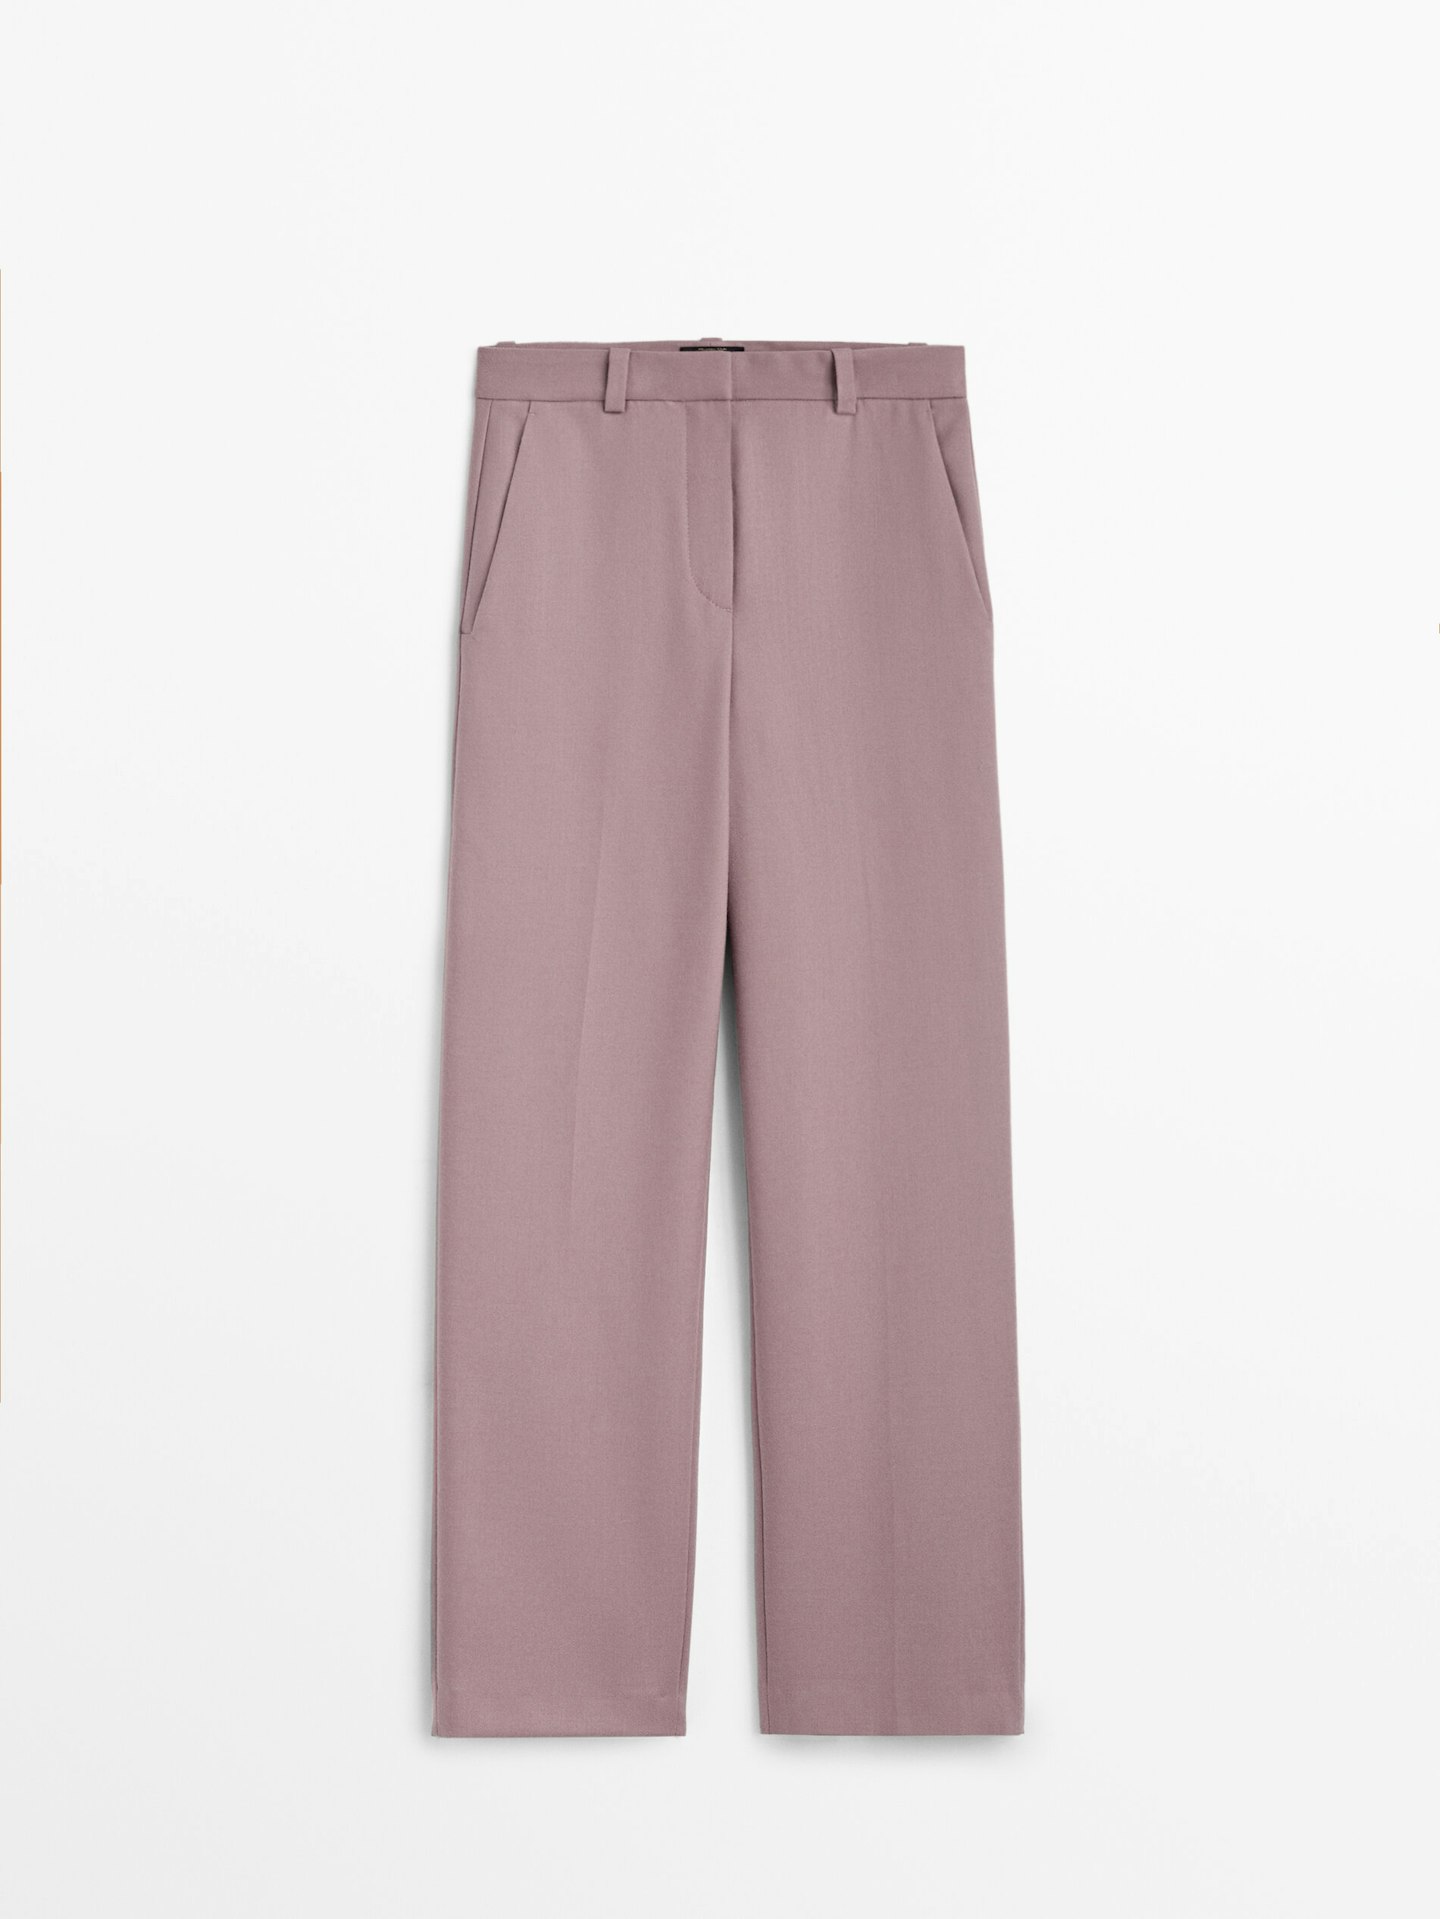 Massimo Dutti, Wool Flannel Trousers, £89.95